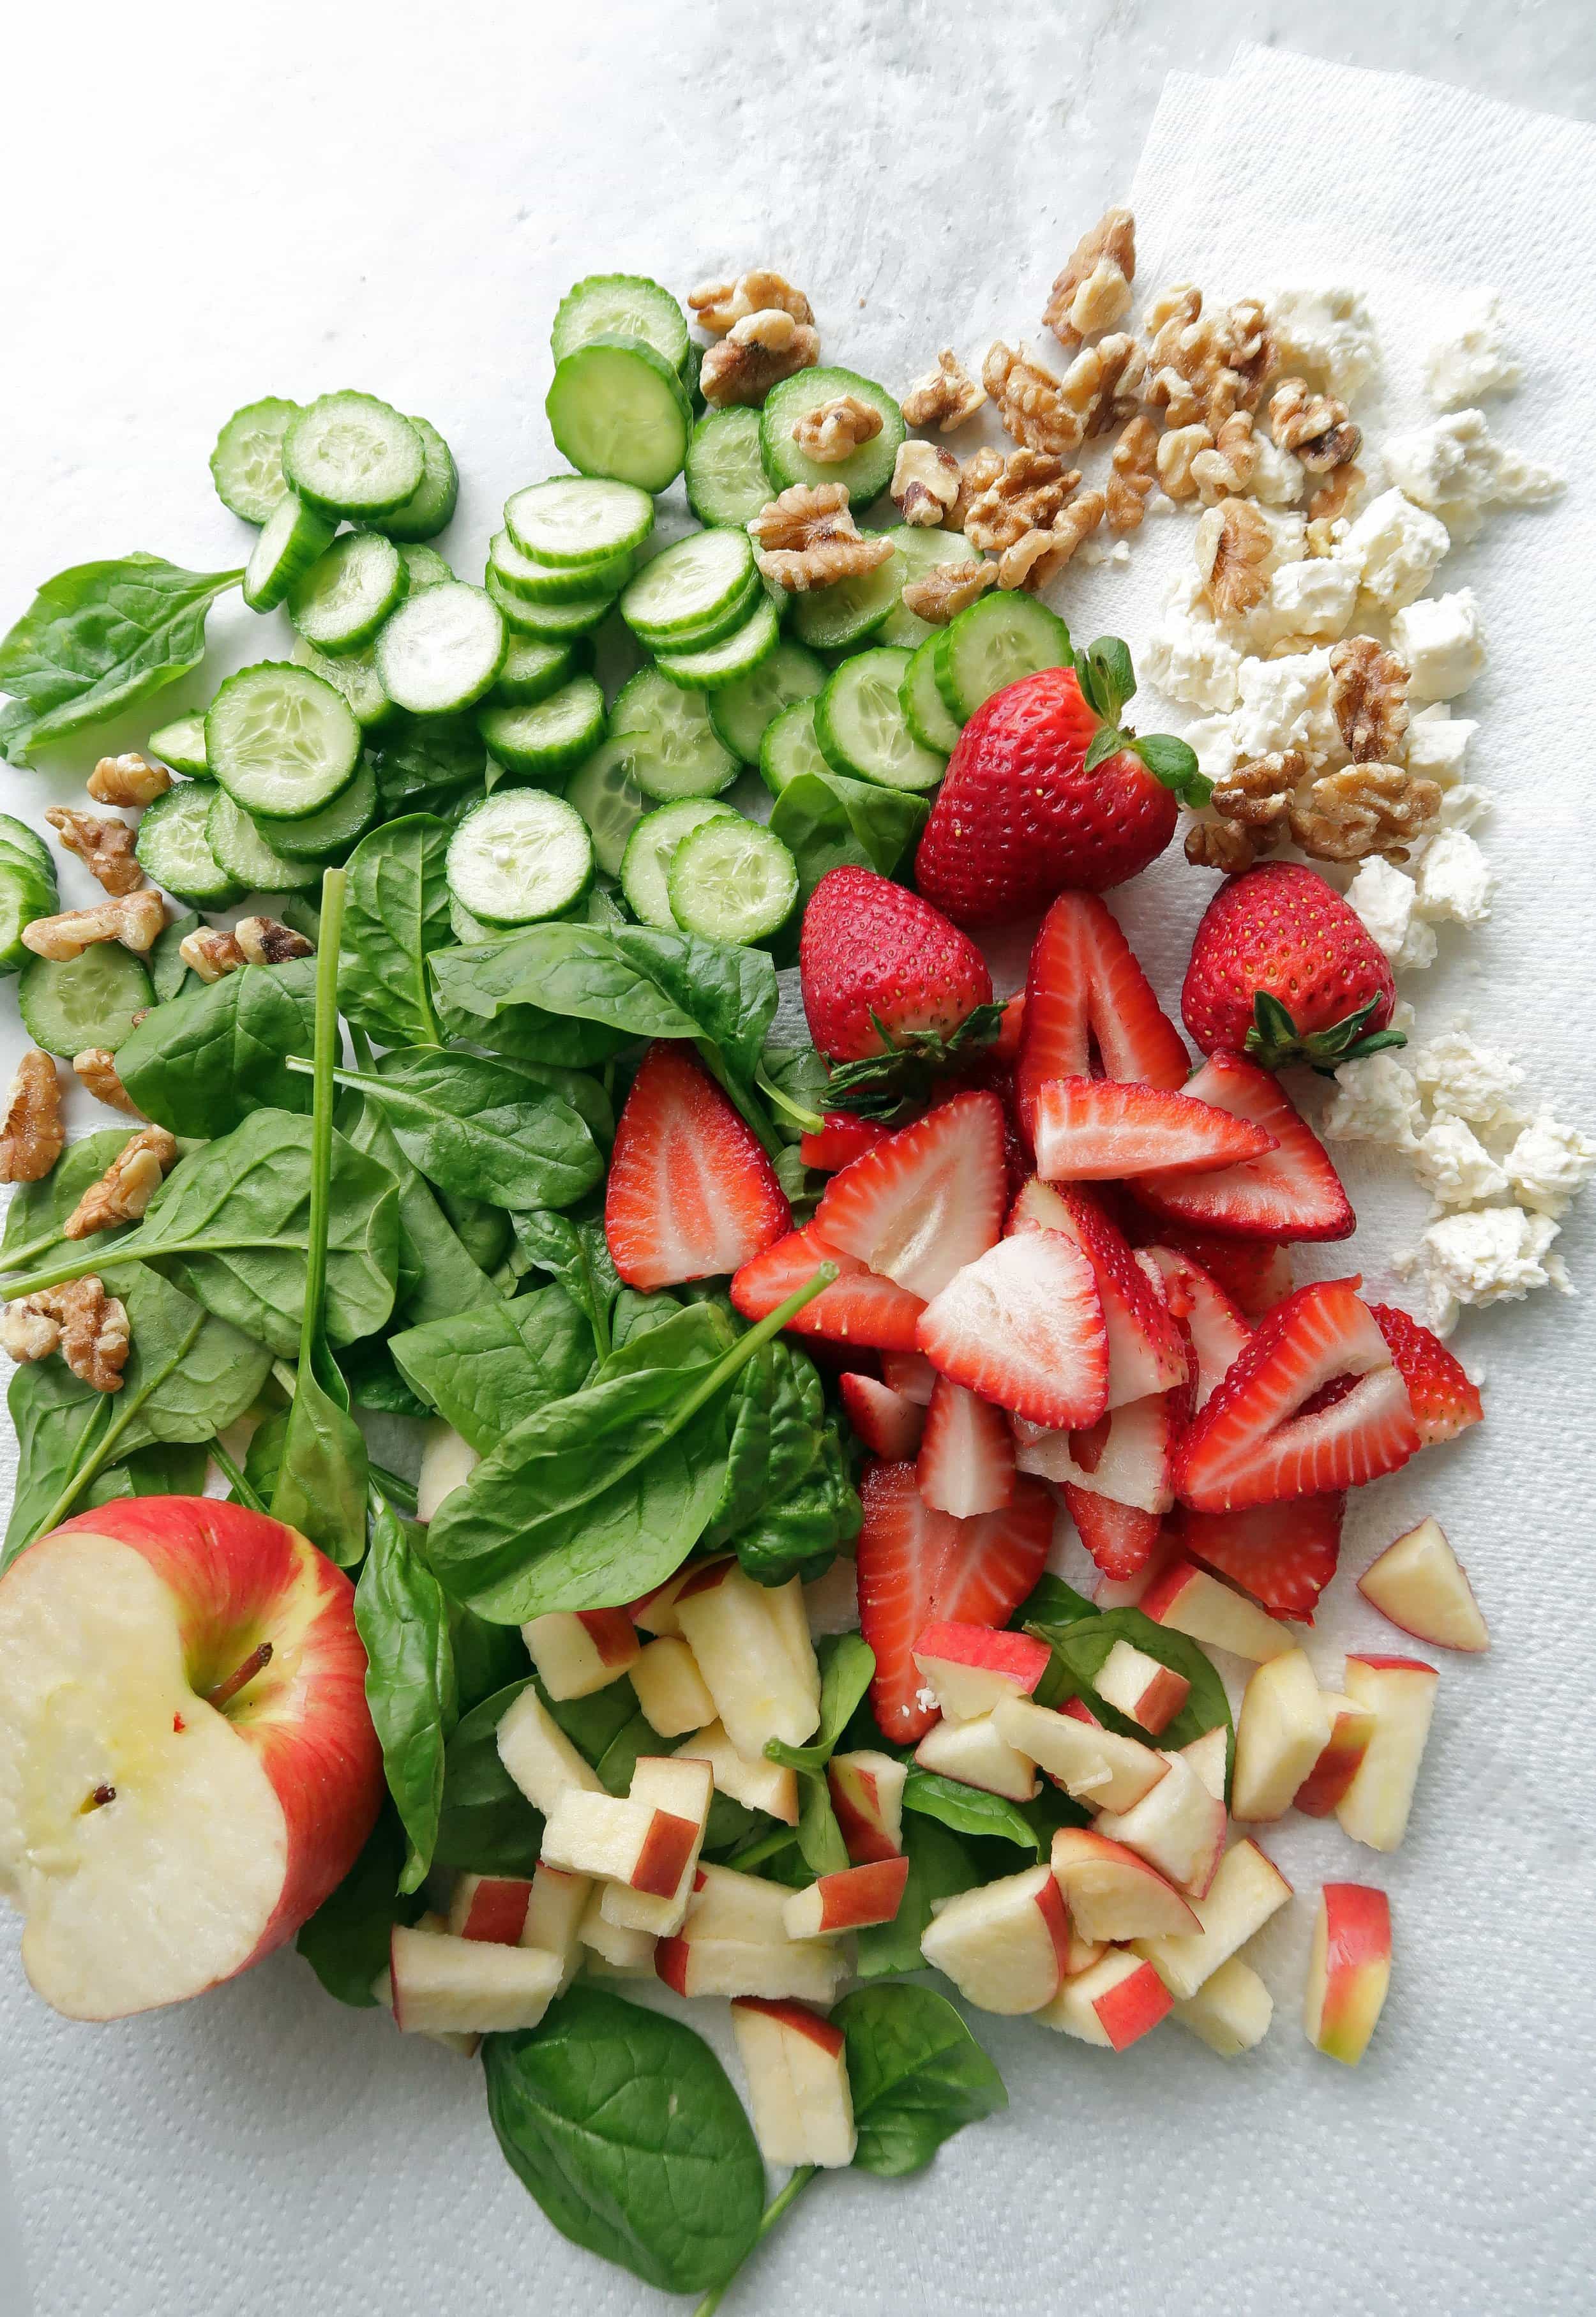 Spinach topped with pieces of apple, strawberry halves, cucumber slices, walnuts, and feta.